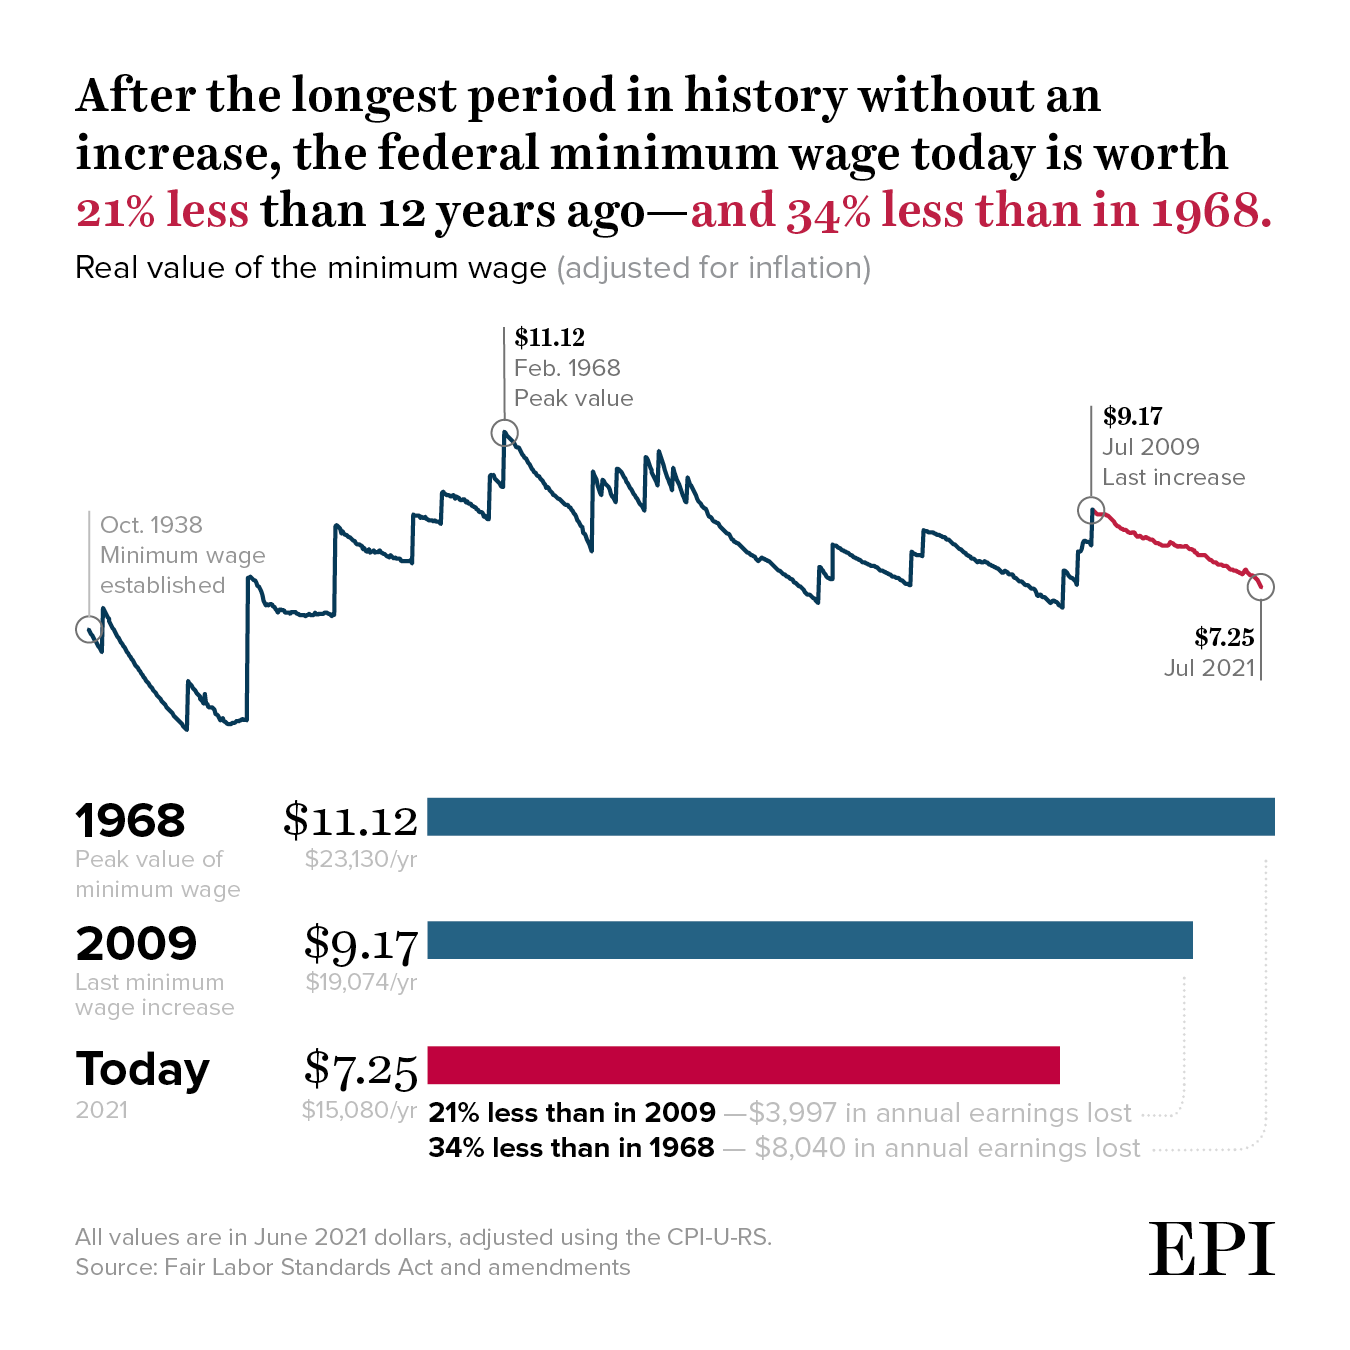 After the longest period in history without an increase, the federal minimum wage today is worth 21% less than 12 years ago—and 34% less than in 1968.